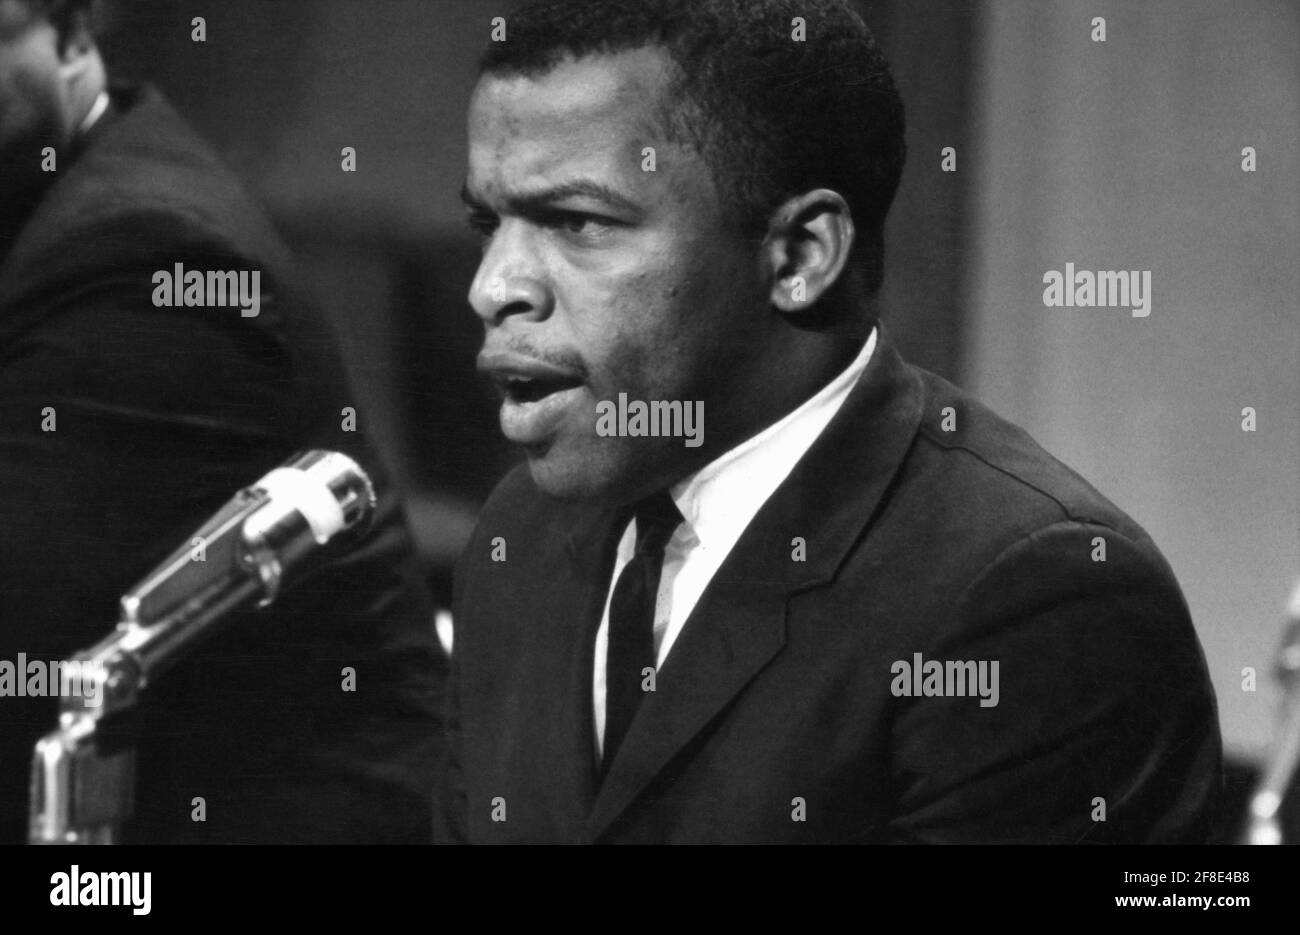 John Lewis, Chairman of the Student Nonviolent Coordinating Committee, speaking at meeting of American Society of Newspaper Editors, Statler Hilton Hotel, Washington, D.C., USA, Marion S. Trikosko, April 16, 1964 Stock Photo